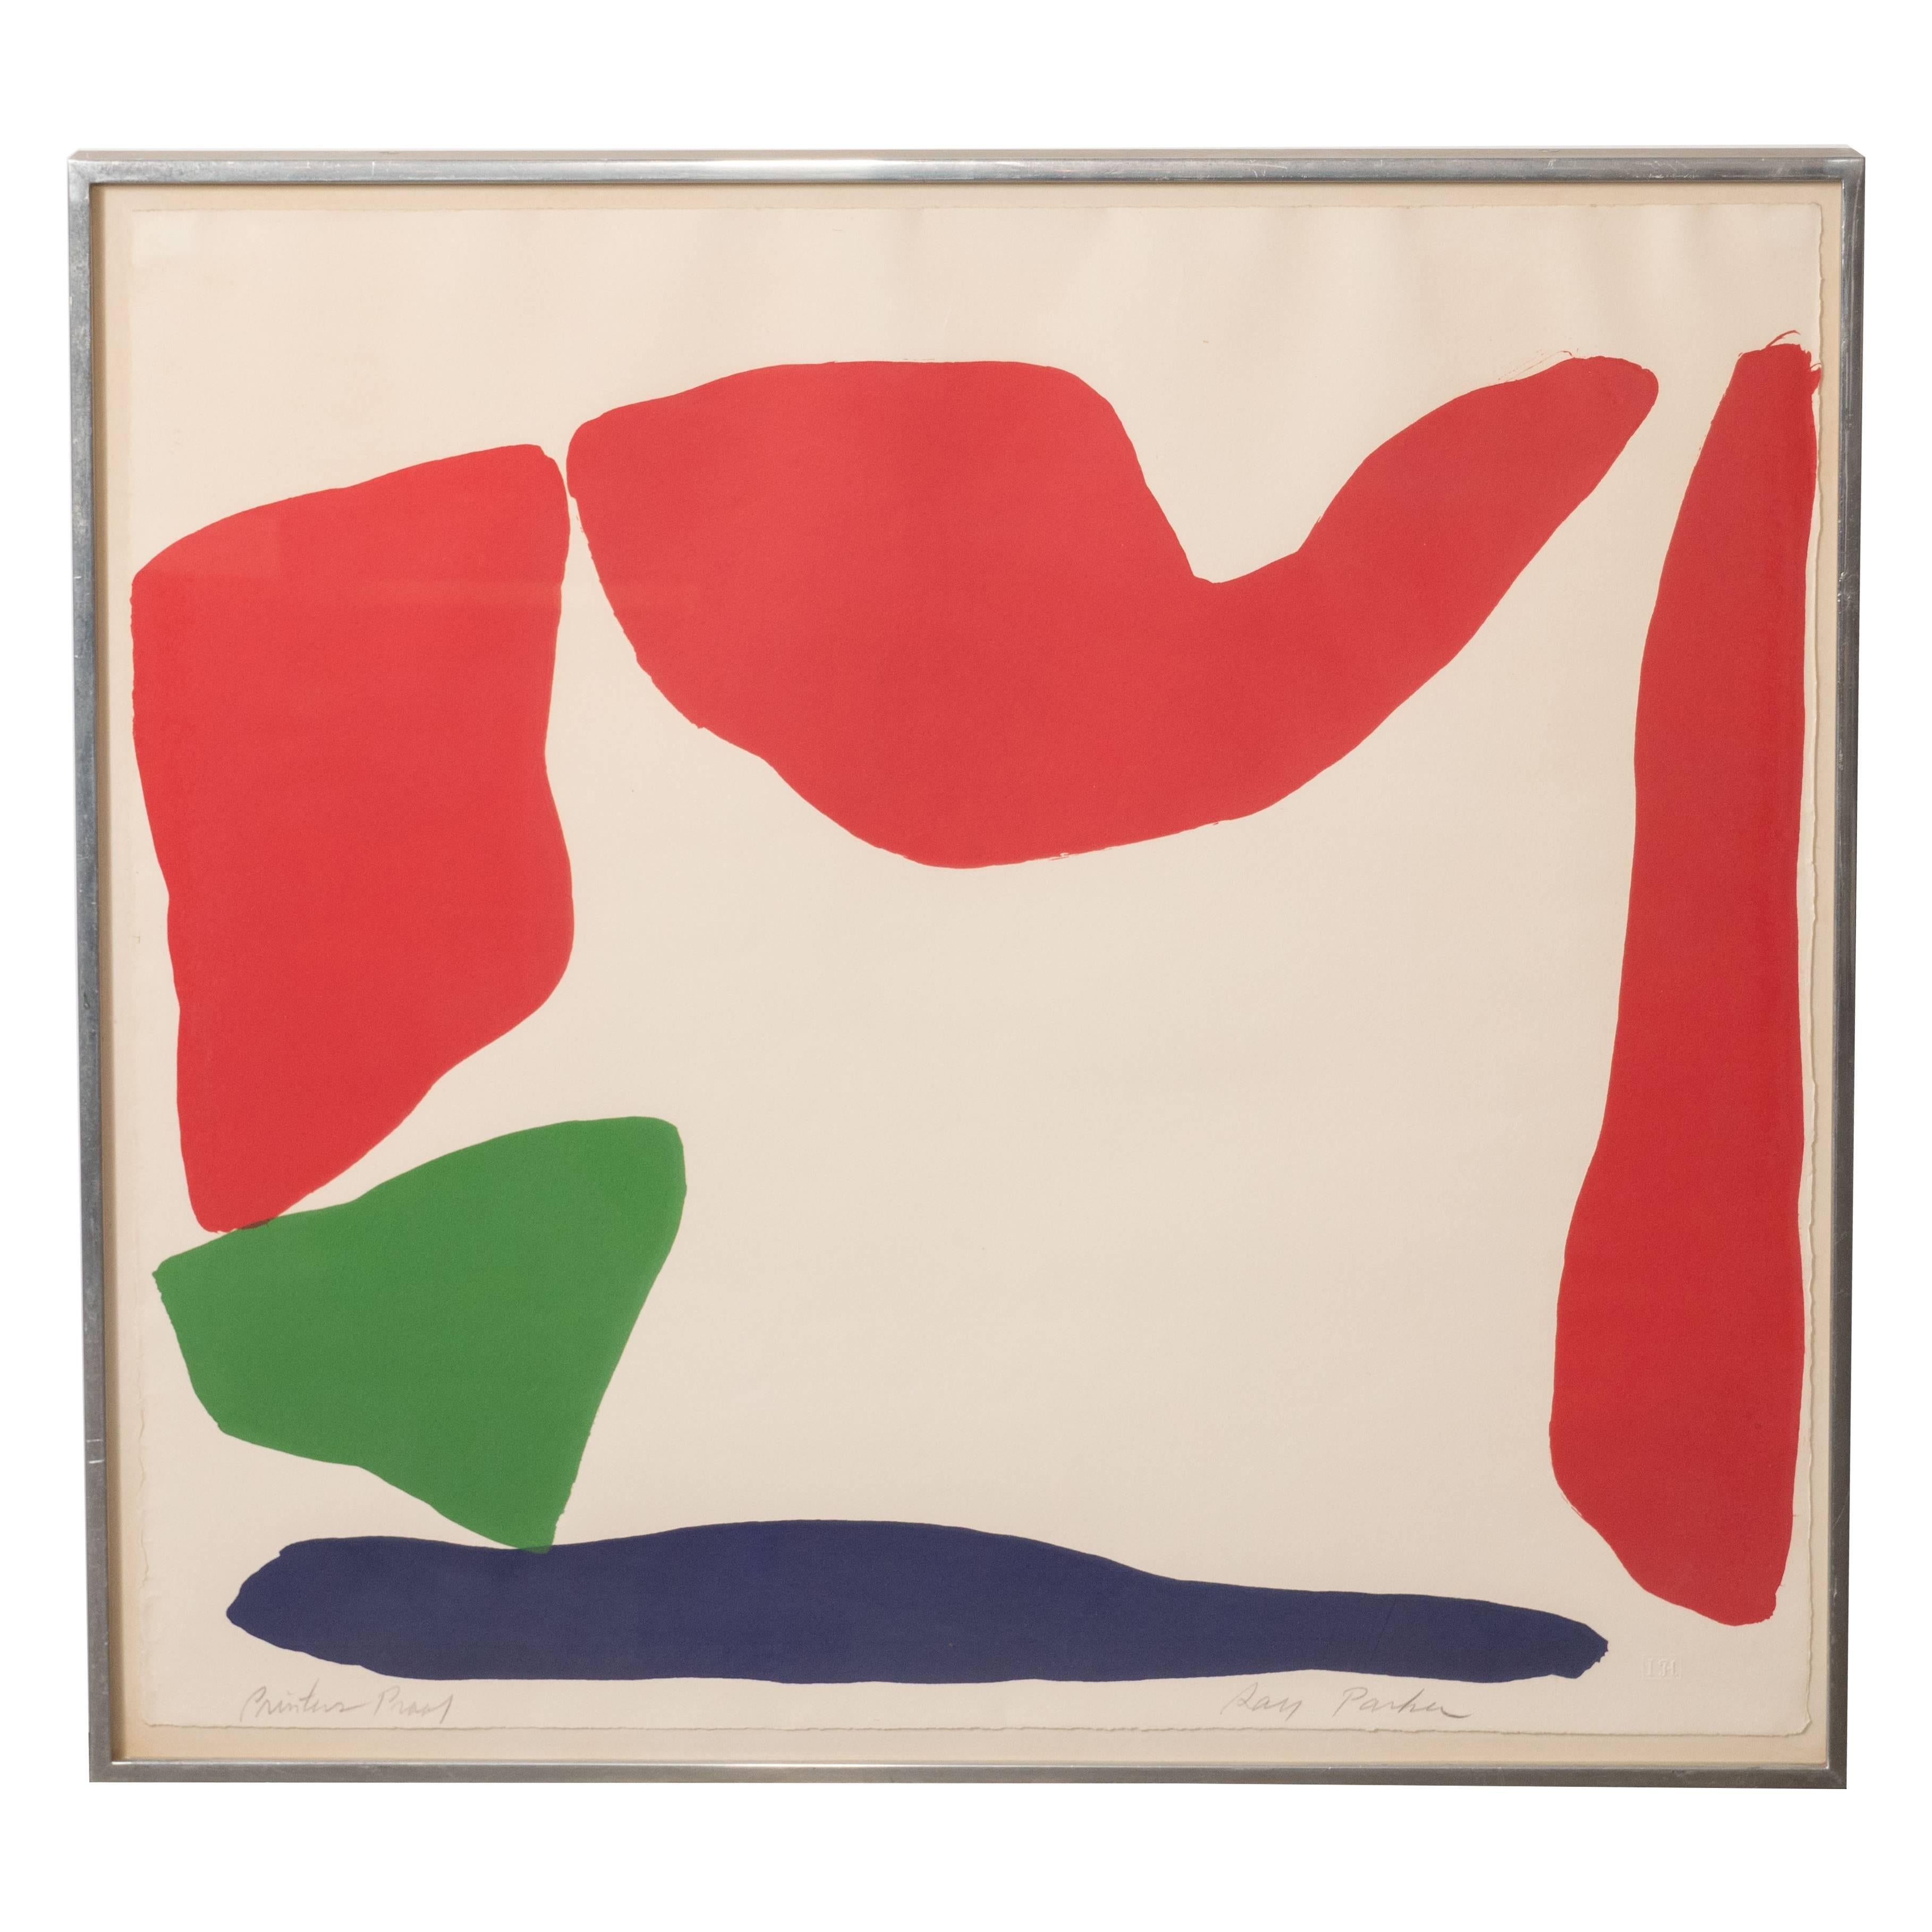 Raymond Parker Print - Modernist Abstract Lithograph by Ray Parker in Red, Green, and Blue